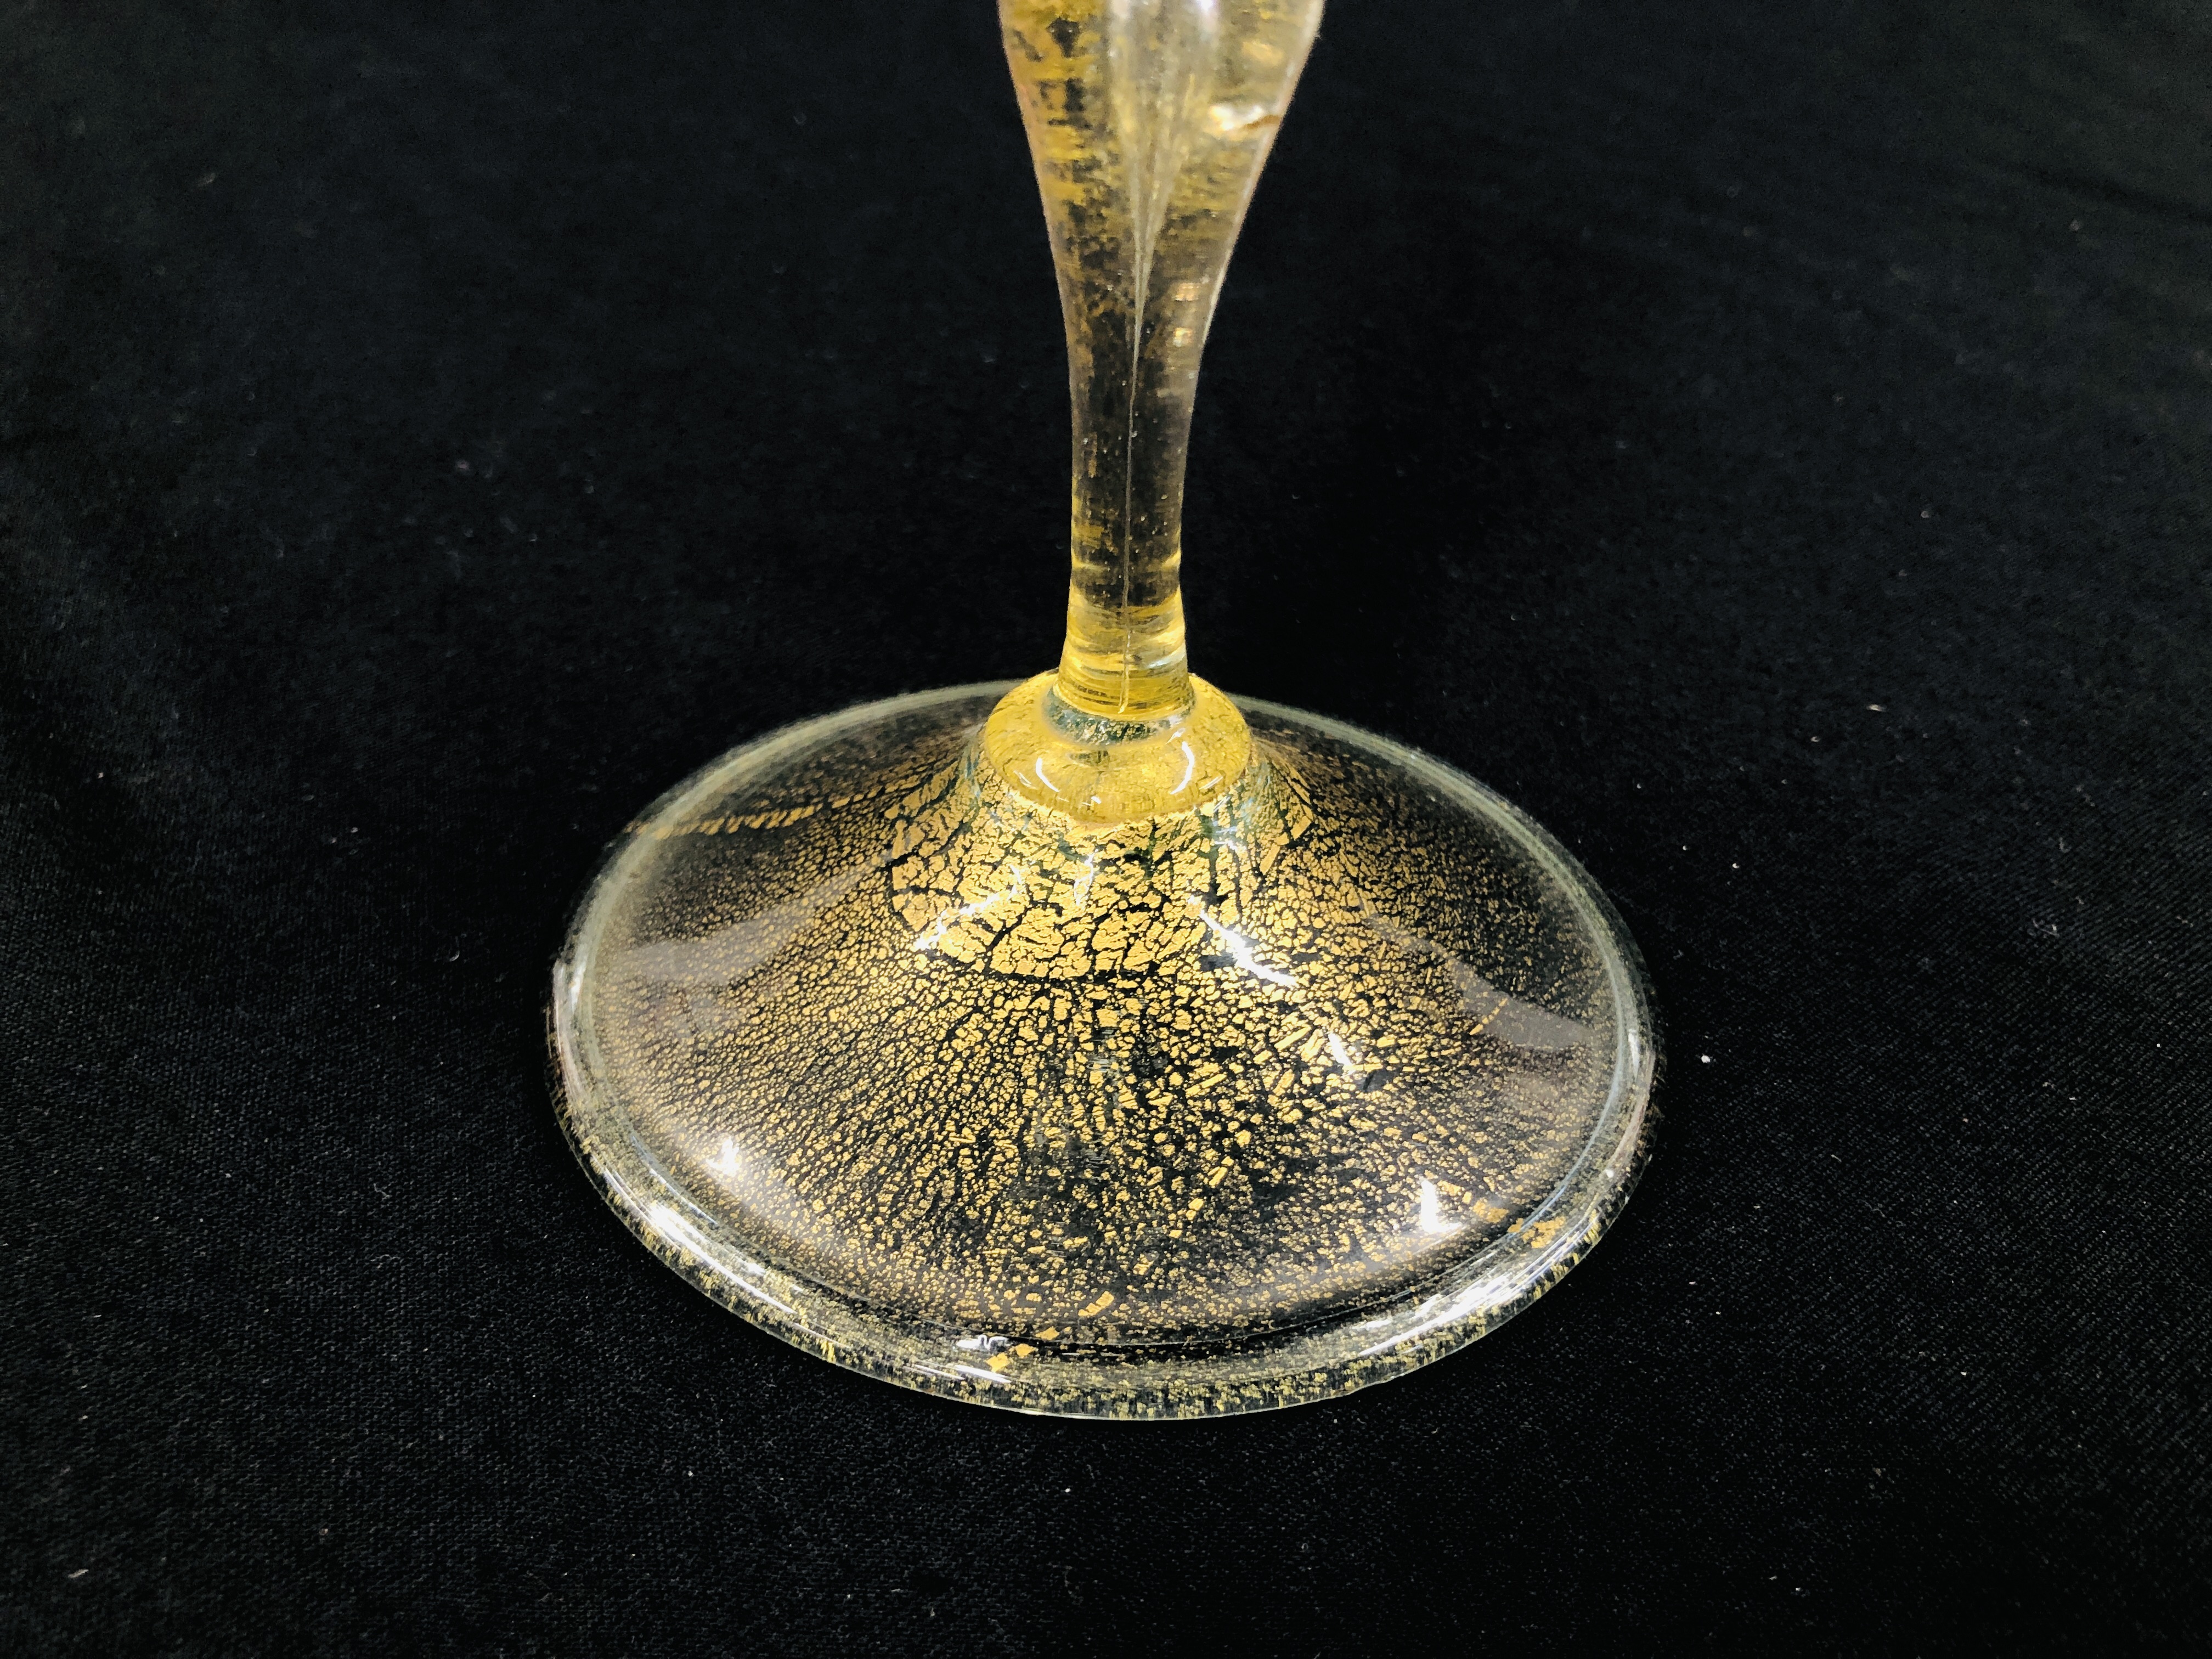 A VENETIAN GLASS WITH CONICAL BOWL, THE STEM WITH WHITE METAL COLLAR, 25.5CM HIGH. - Image 4 of 12